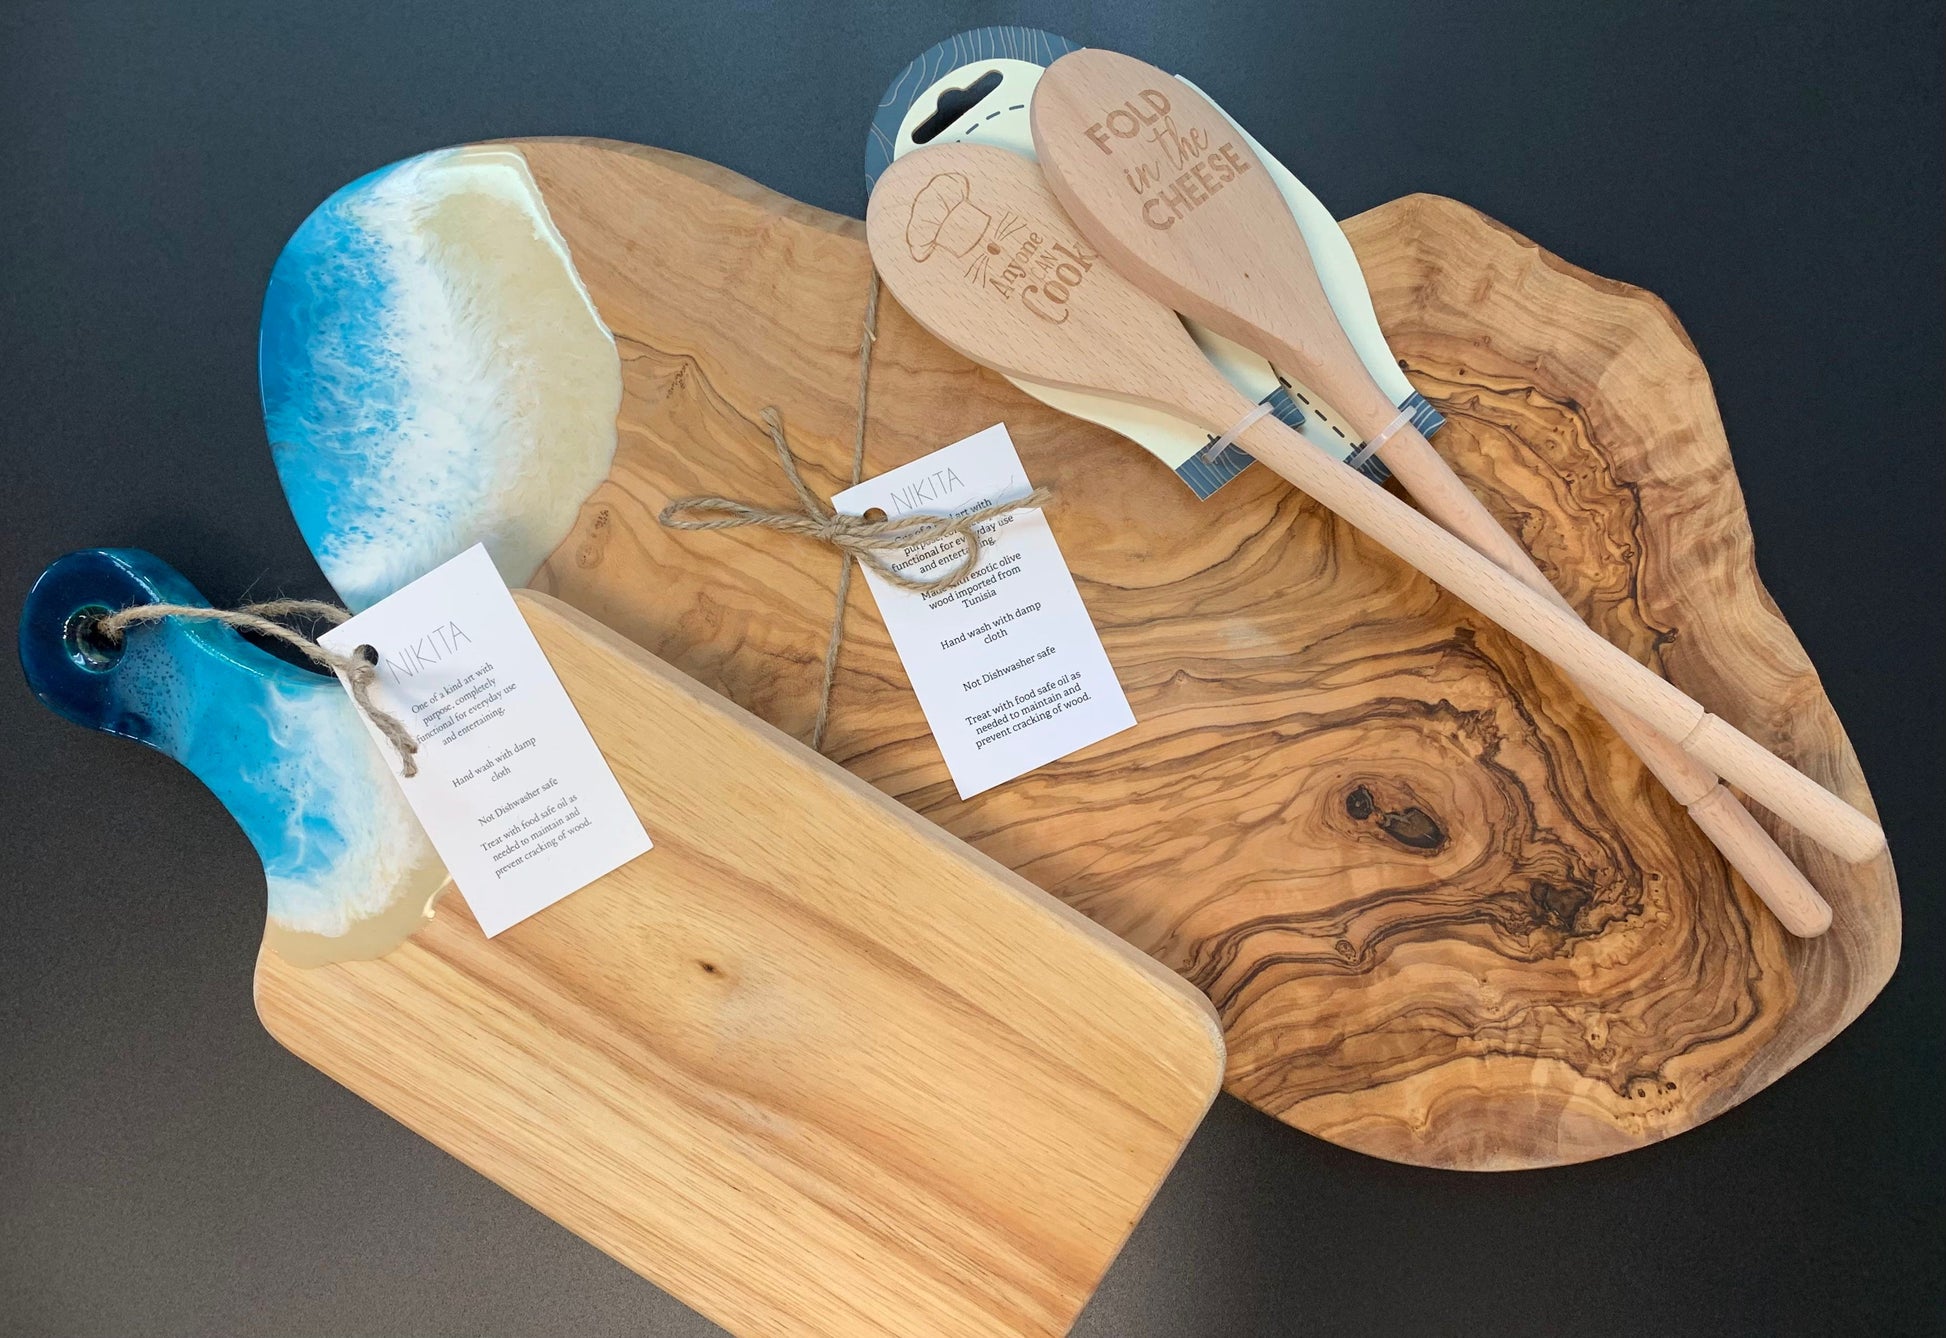 Schitt's Creek - Fold In The Cheese Wooden Spoon – North to South Designs